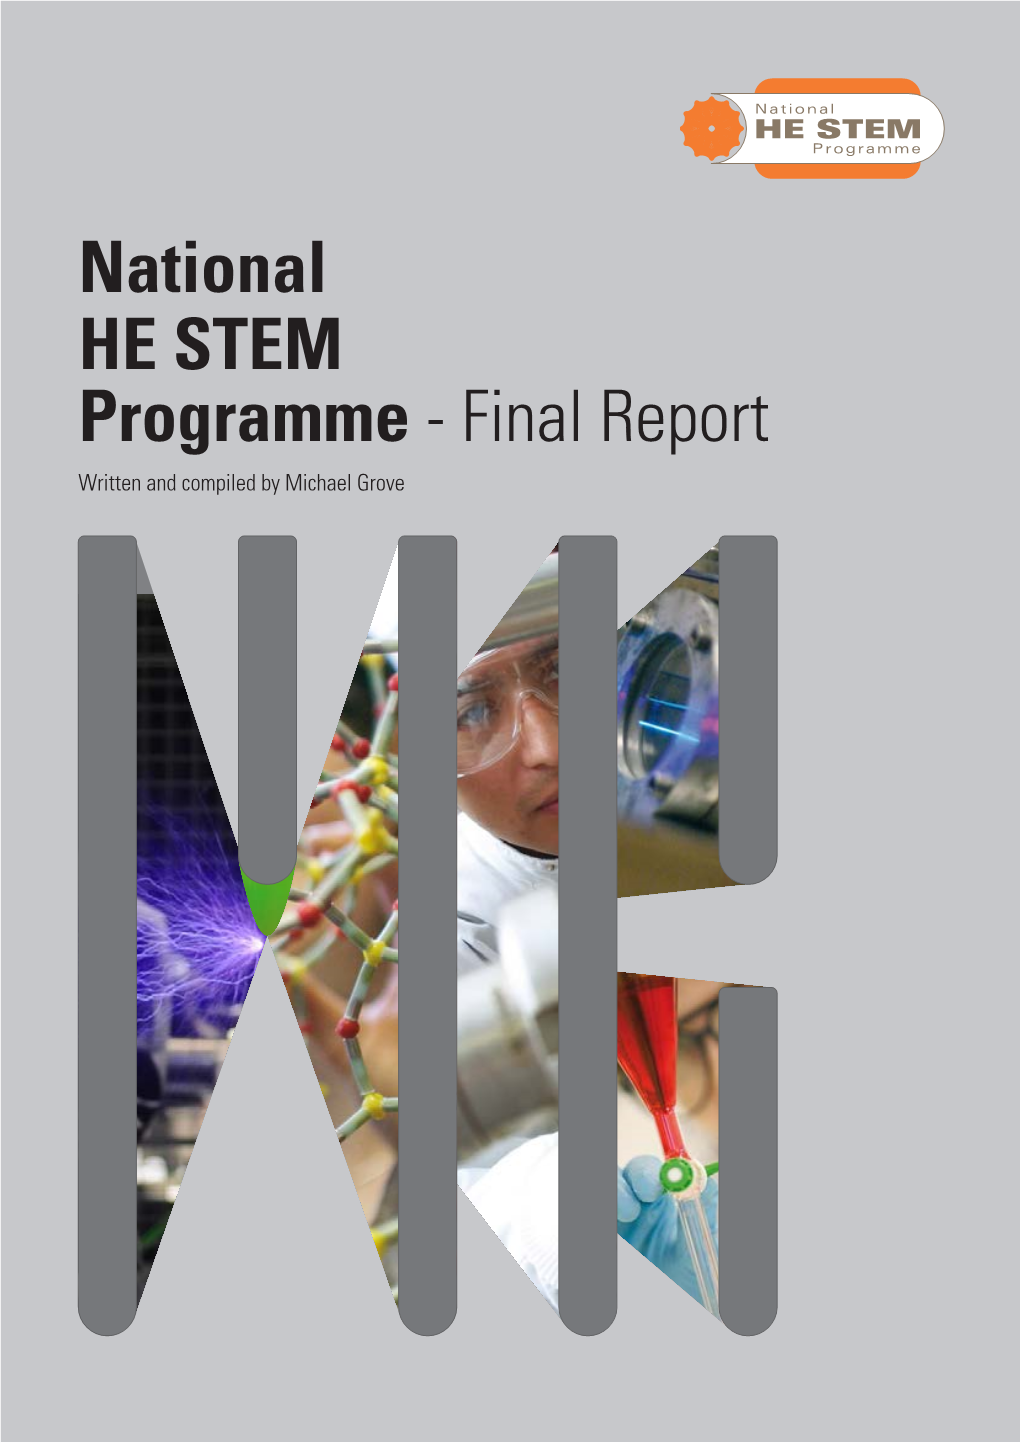 National HE STEM Programme - Final Report Written and Compiled by Michael Grove